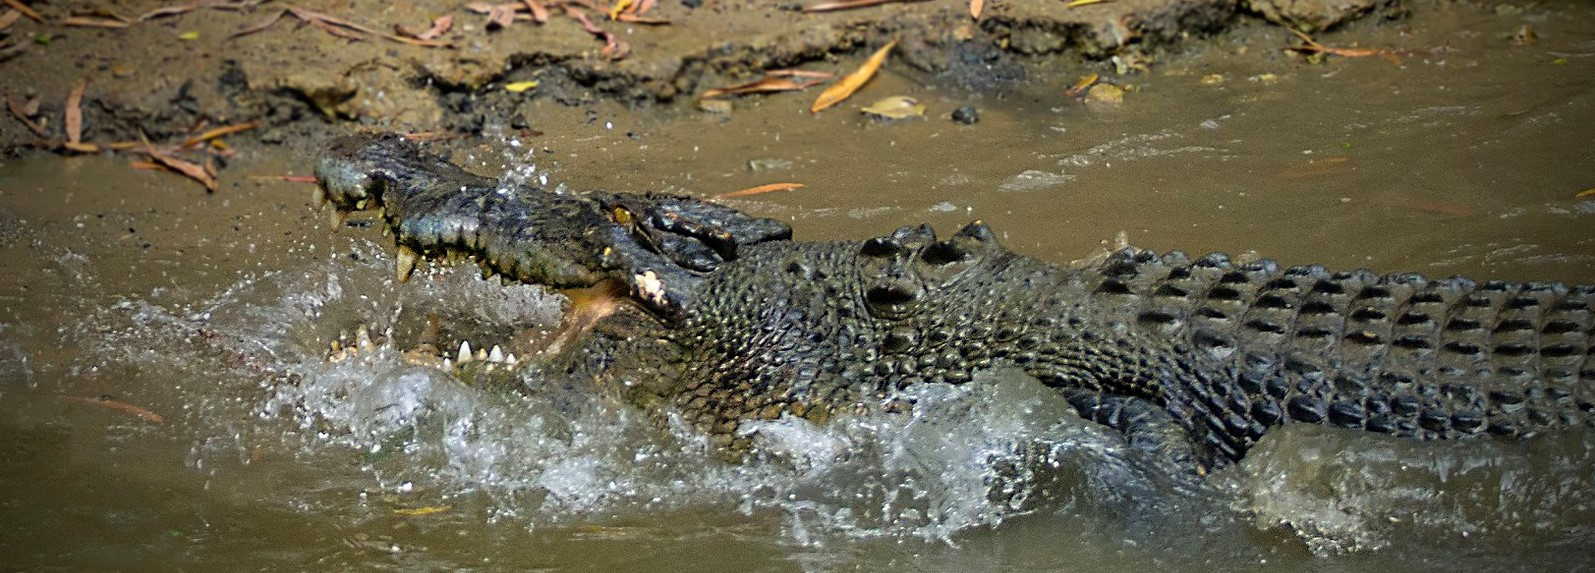 Are there crocodiles in Cairns?